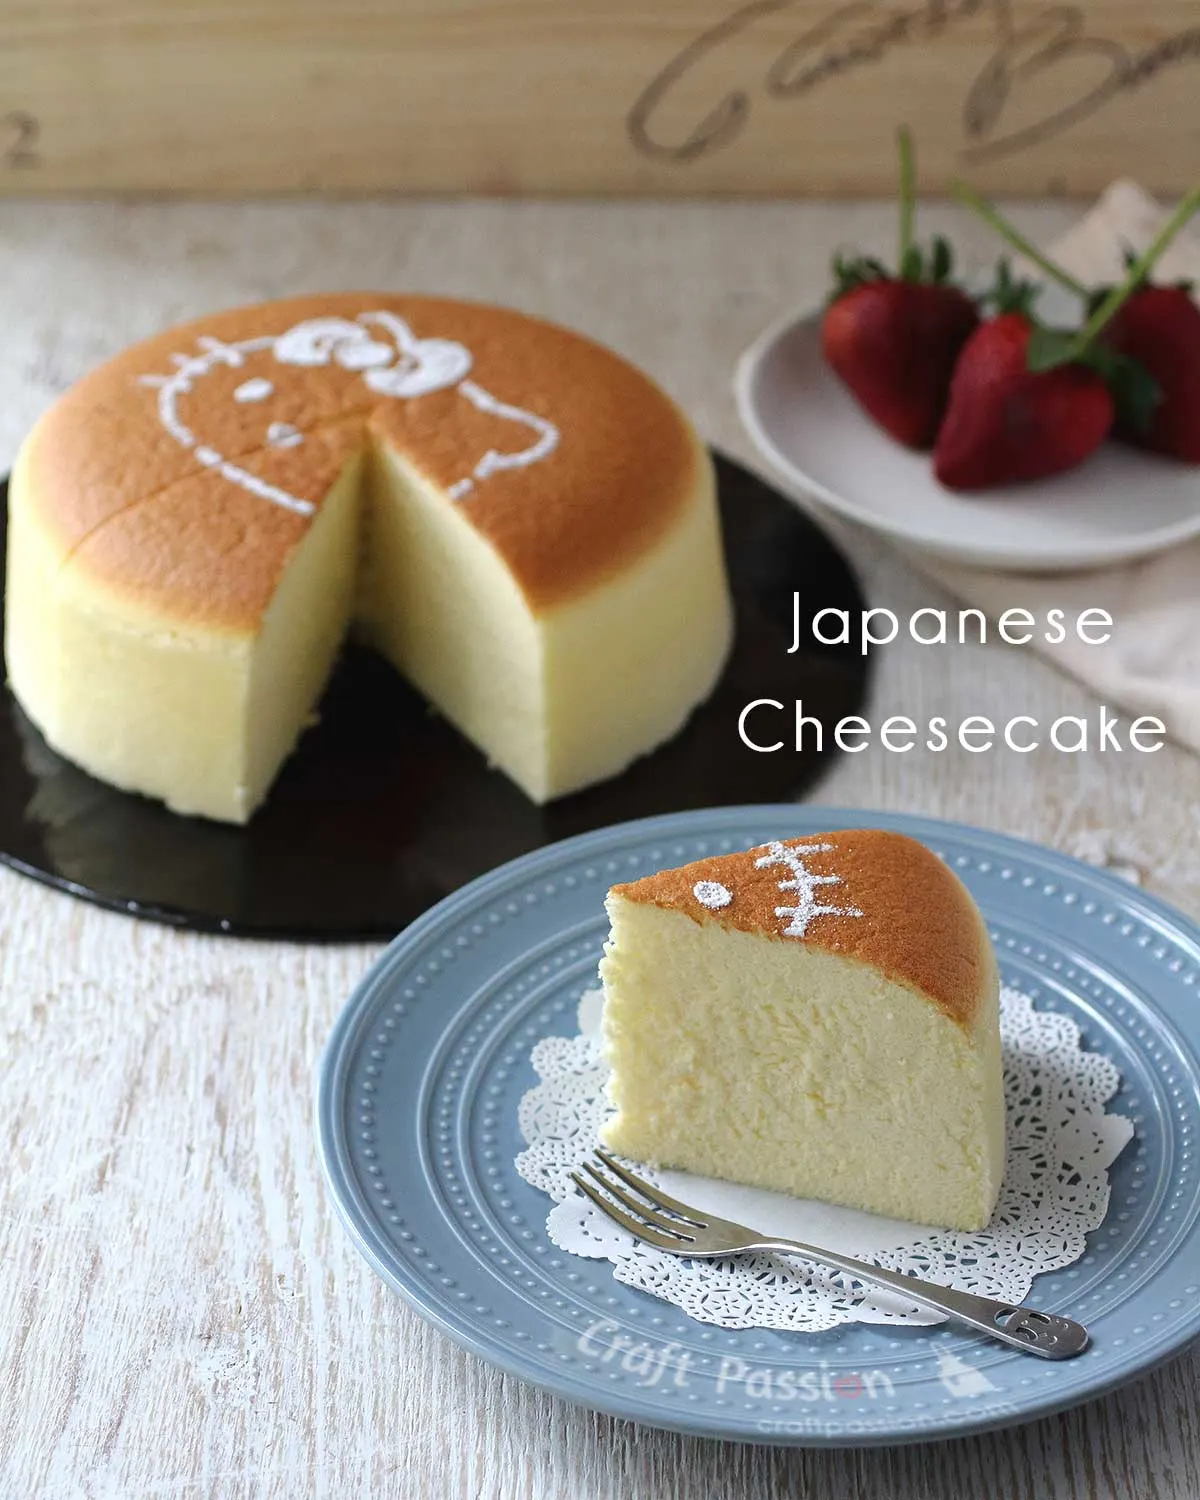 Best Japanese Cheesecake recipe ever! Try out this recipe for a pillowy soft, light-as-air & heavenly cheesecake that includes a step by step video.